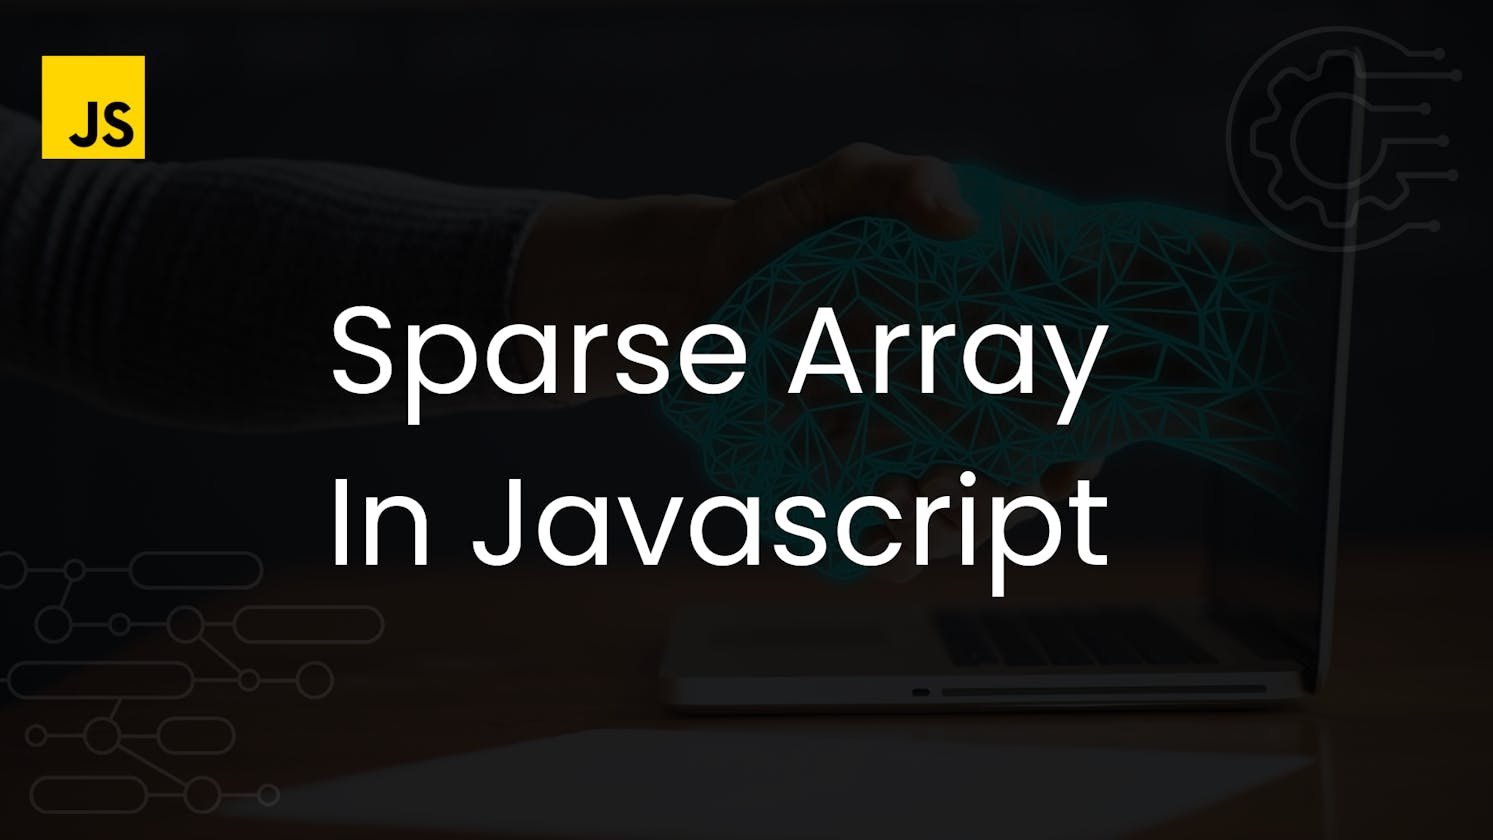 Ever heard about Sparse arrays in JS?